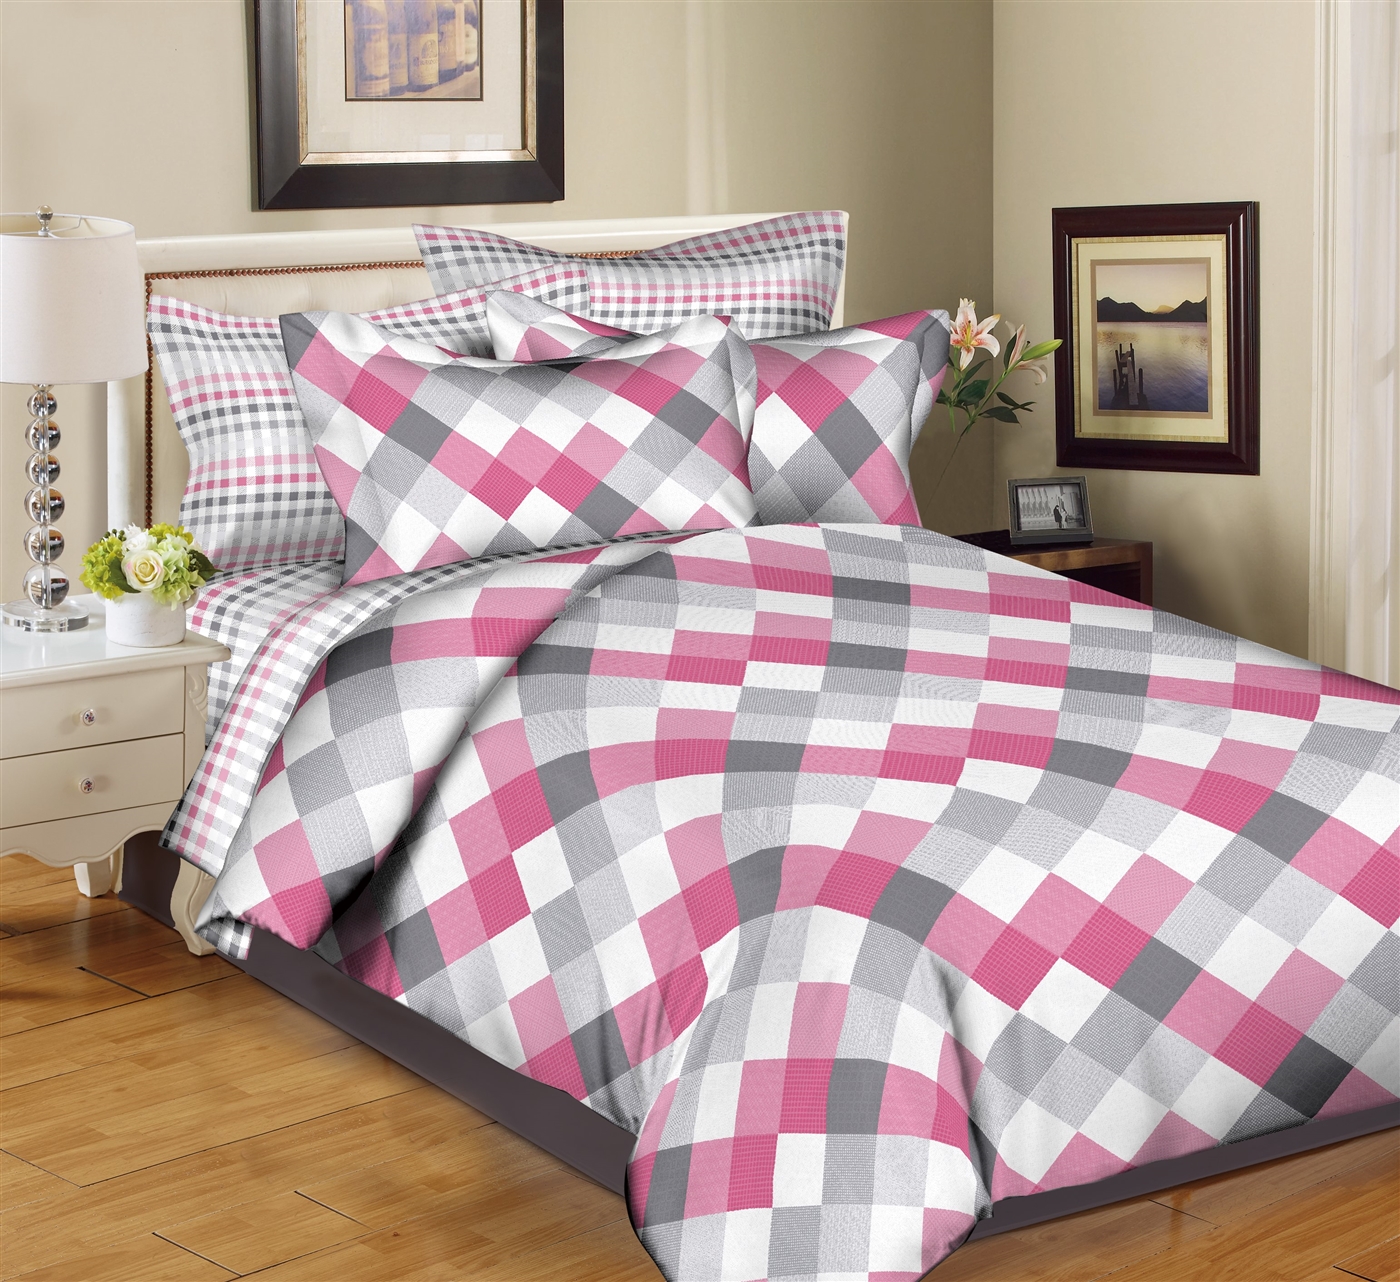 Better Bed Collection: Diamond Mix & Match Pink 8PC Bedding Sets - 200 Thread Count